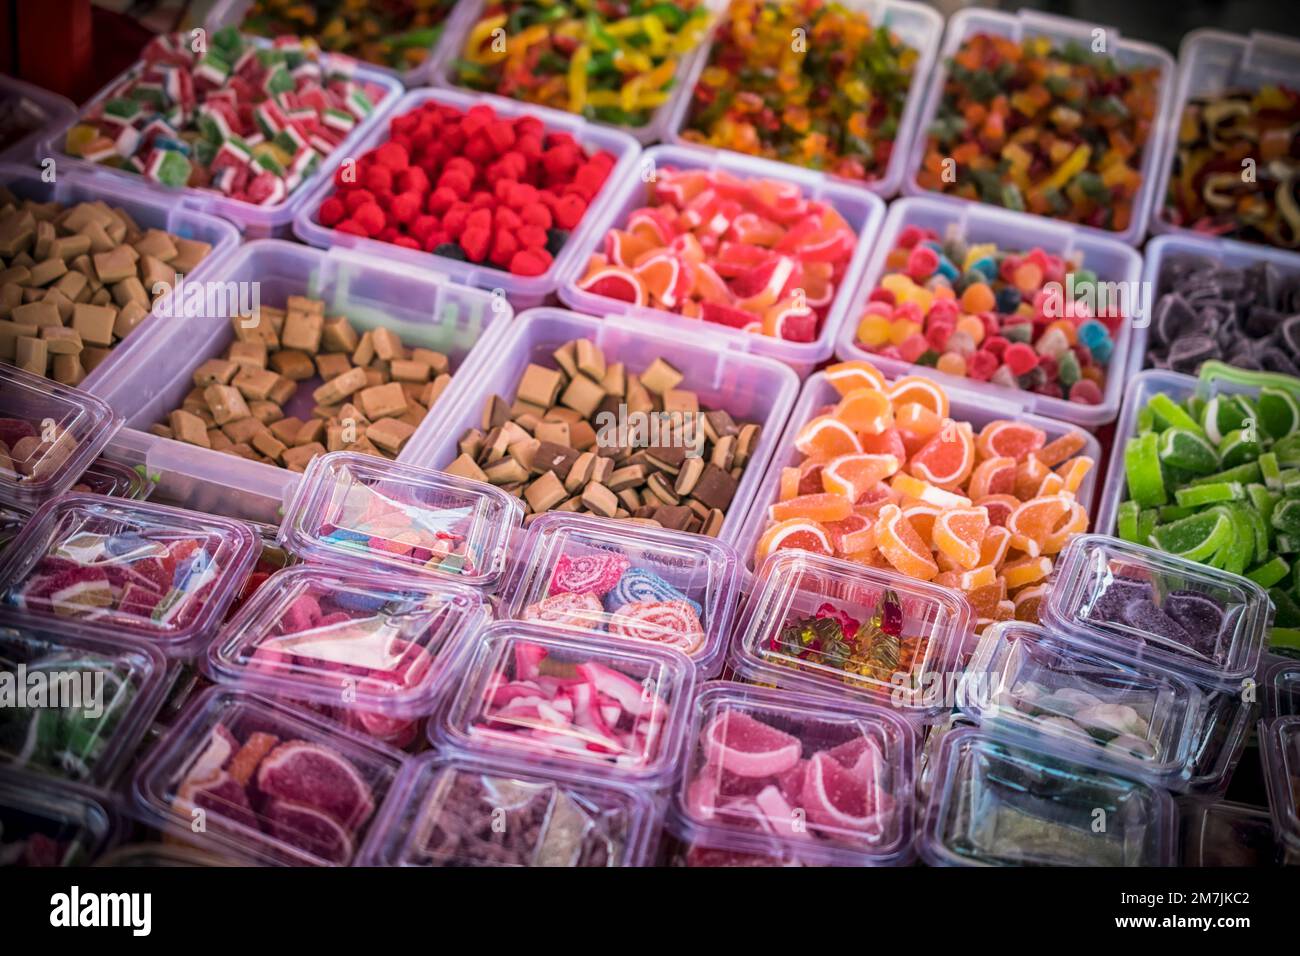 Marketplace - Candy